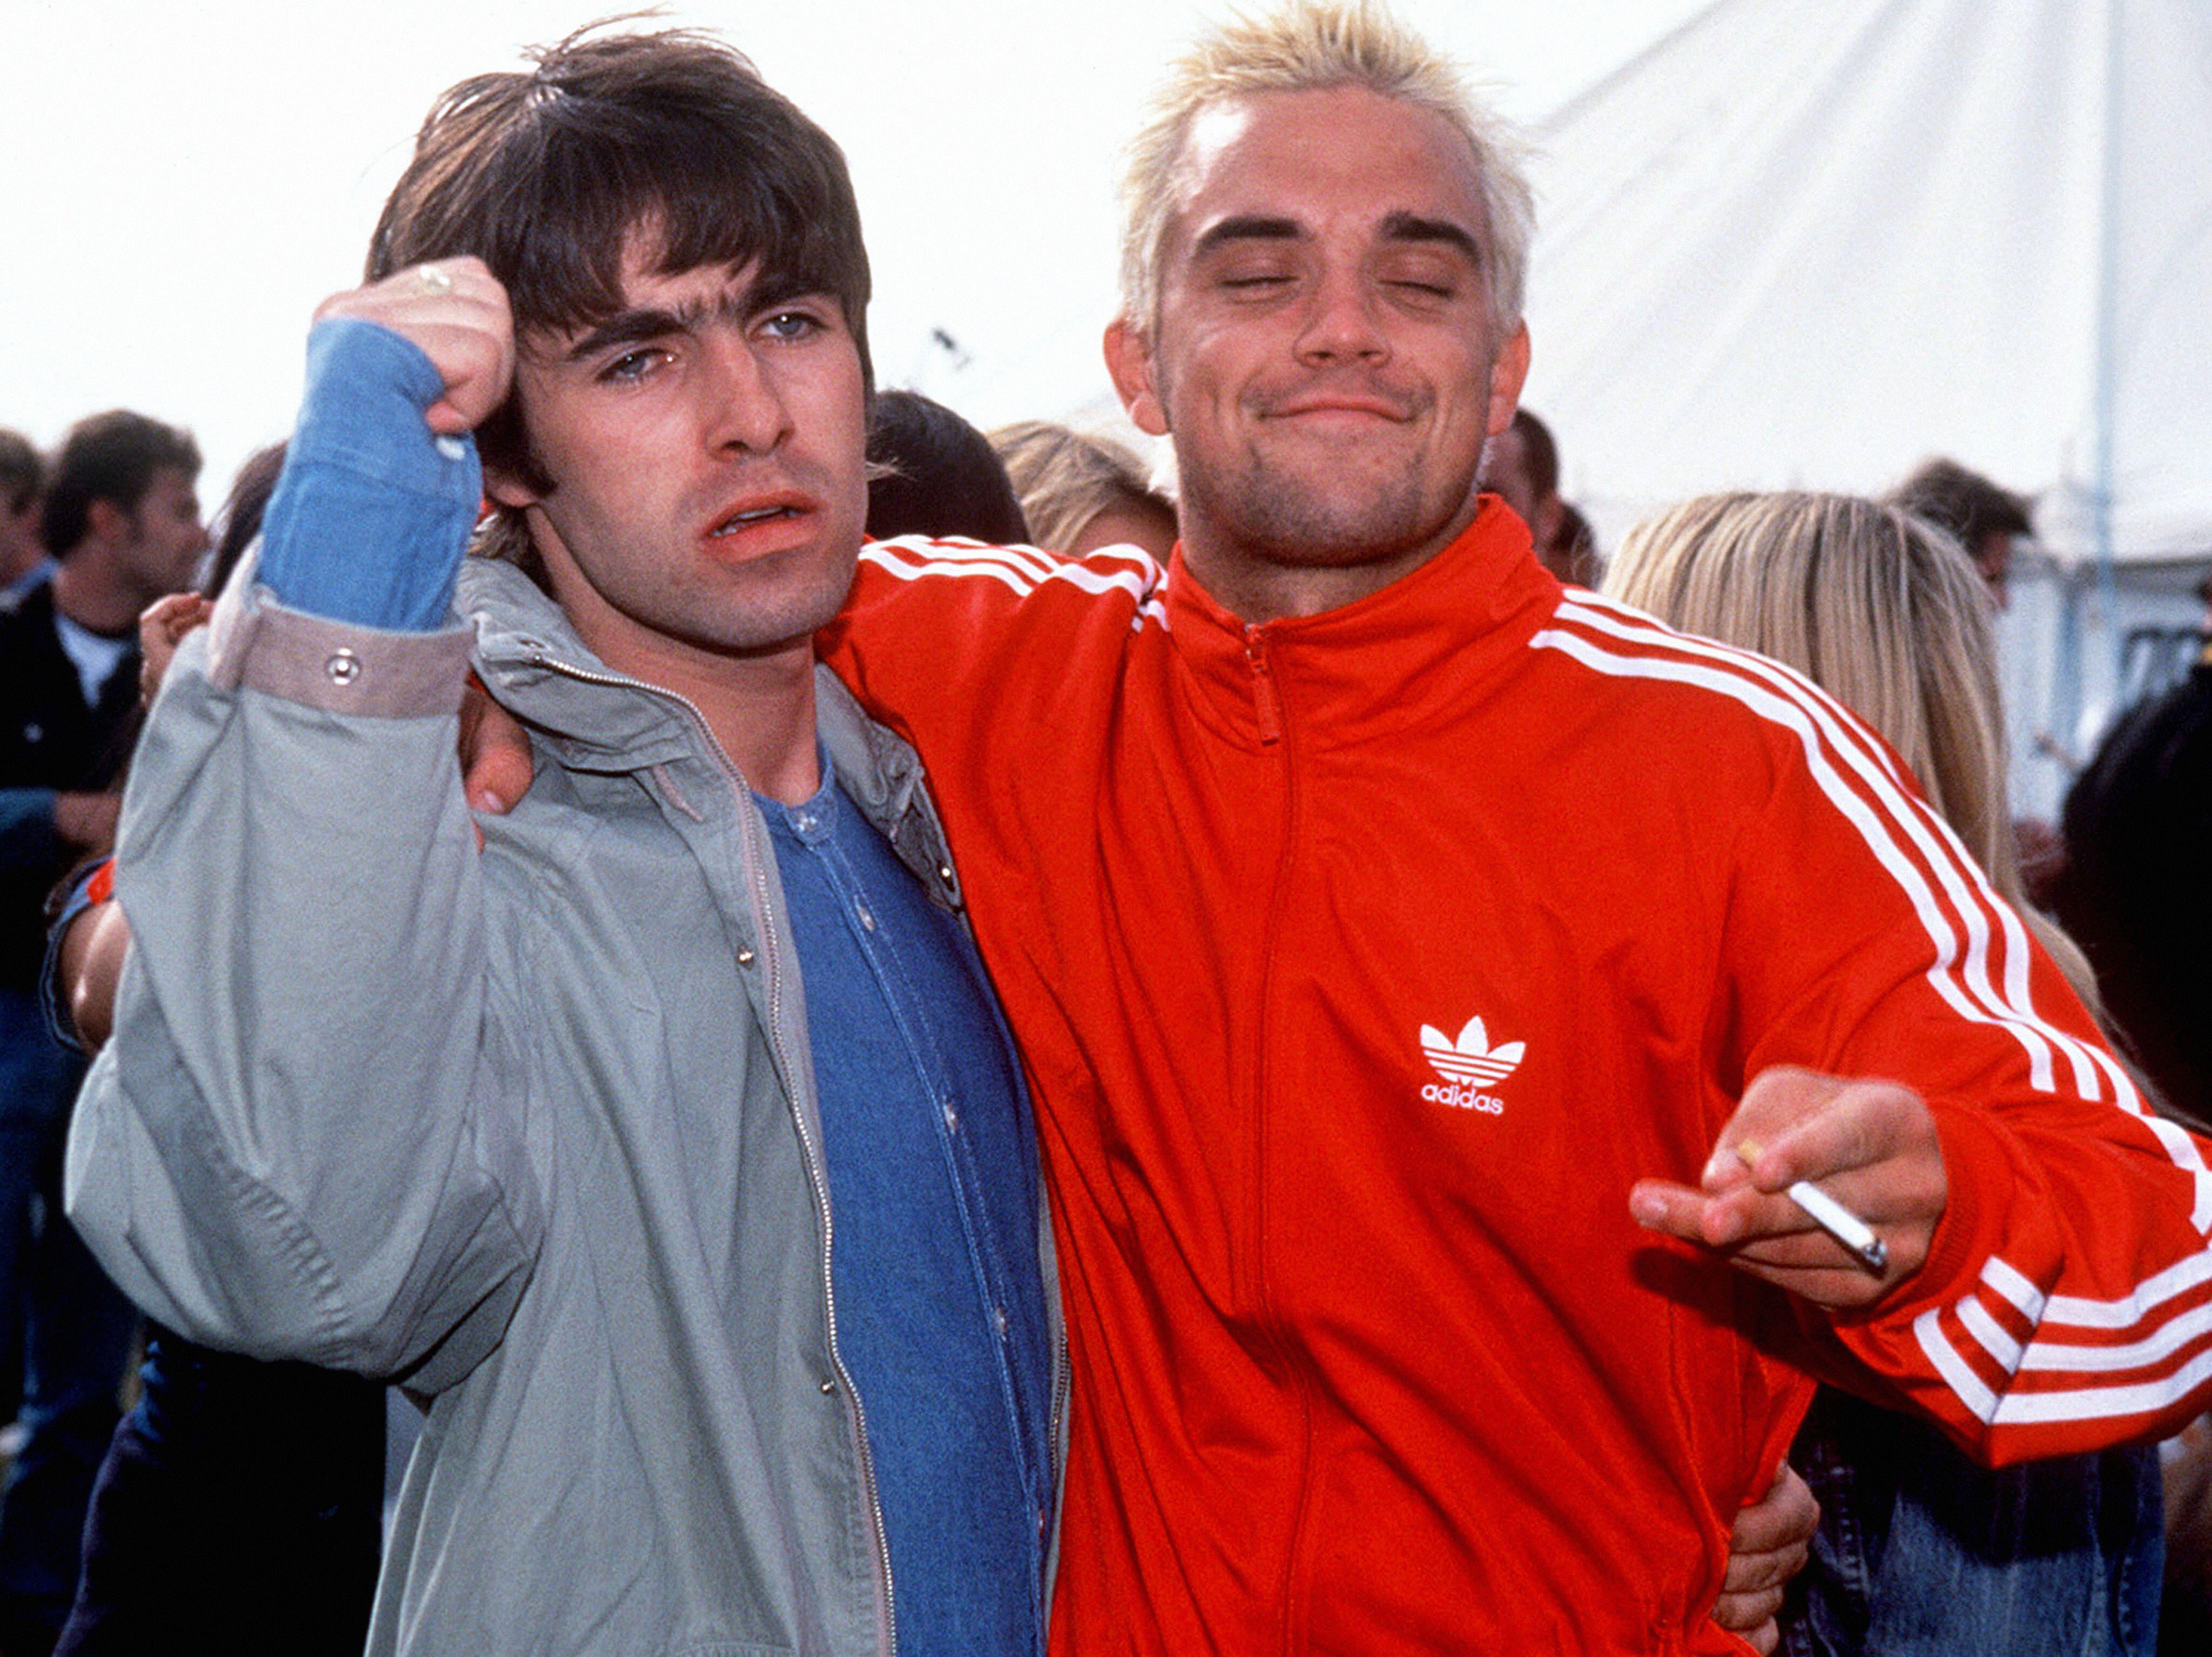 Robbie Williams and Liam Gallagher in 1995